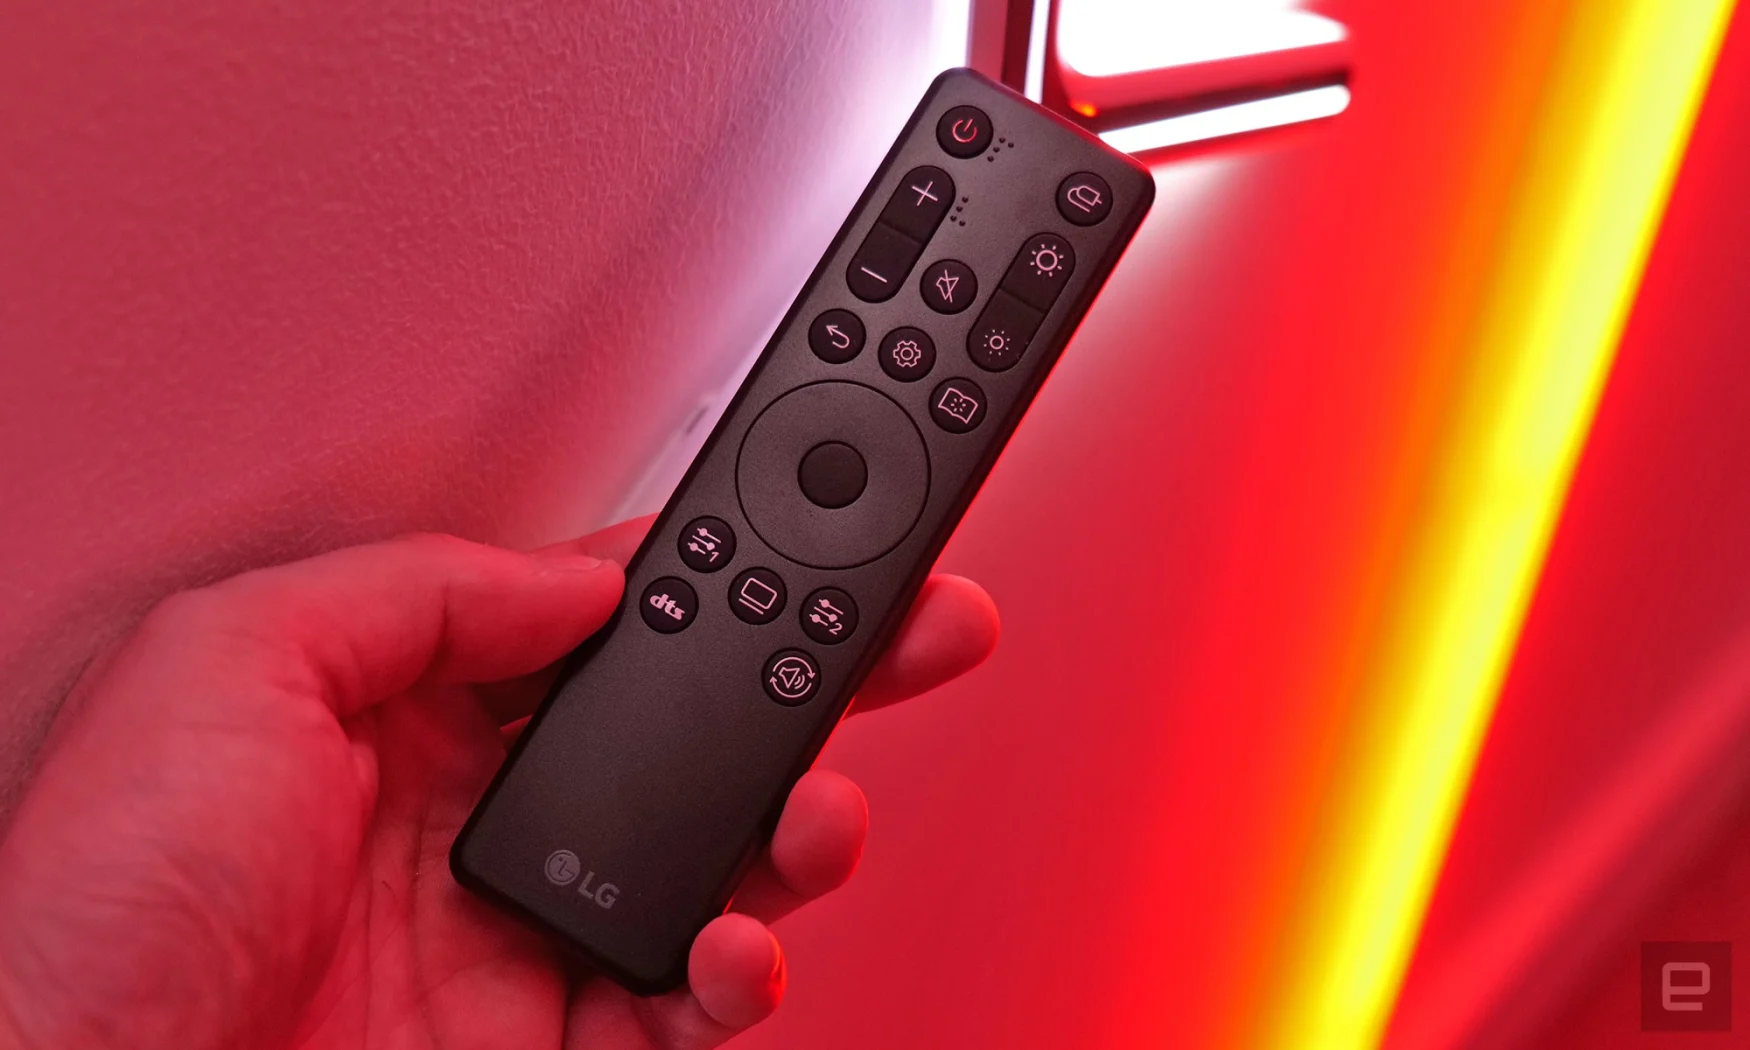 Instead of relying on hidden buttons or joysticks for its latest UltraGear gaming monitors, LG has created a new remote for adjusting picture settings. 